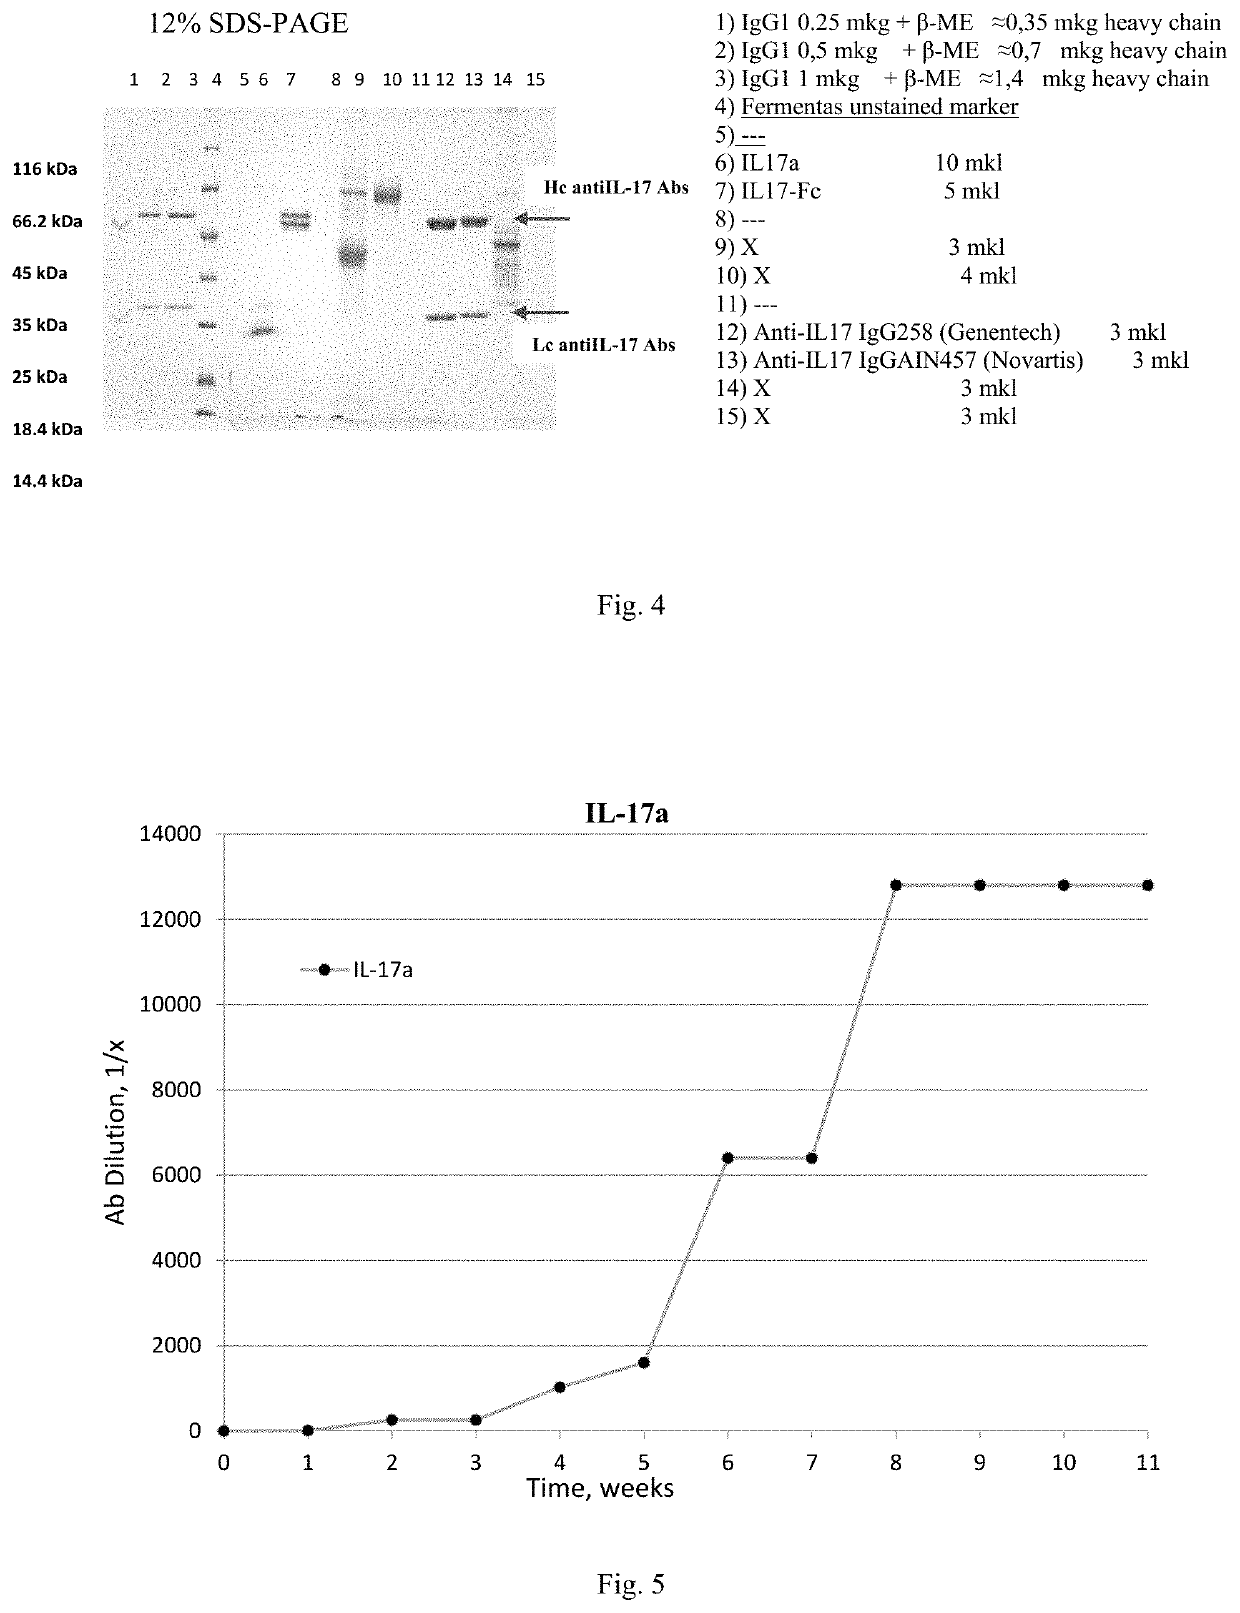 Trispecific antibodies against IL-17A, IL-17F and other pro-inflammatory molecule